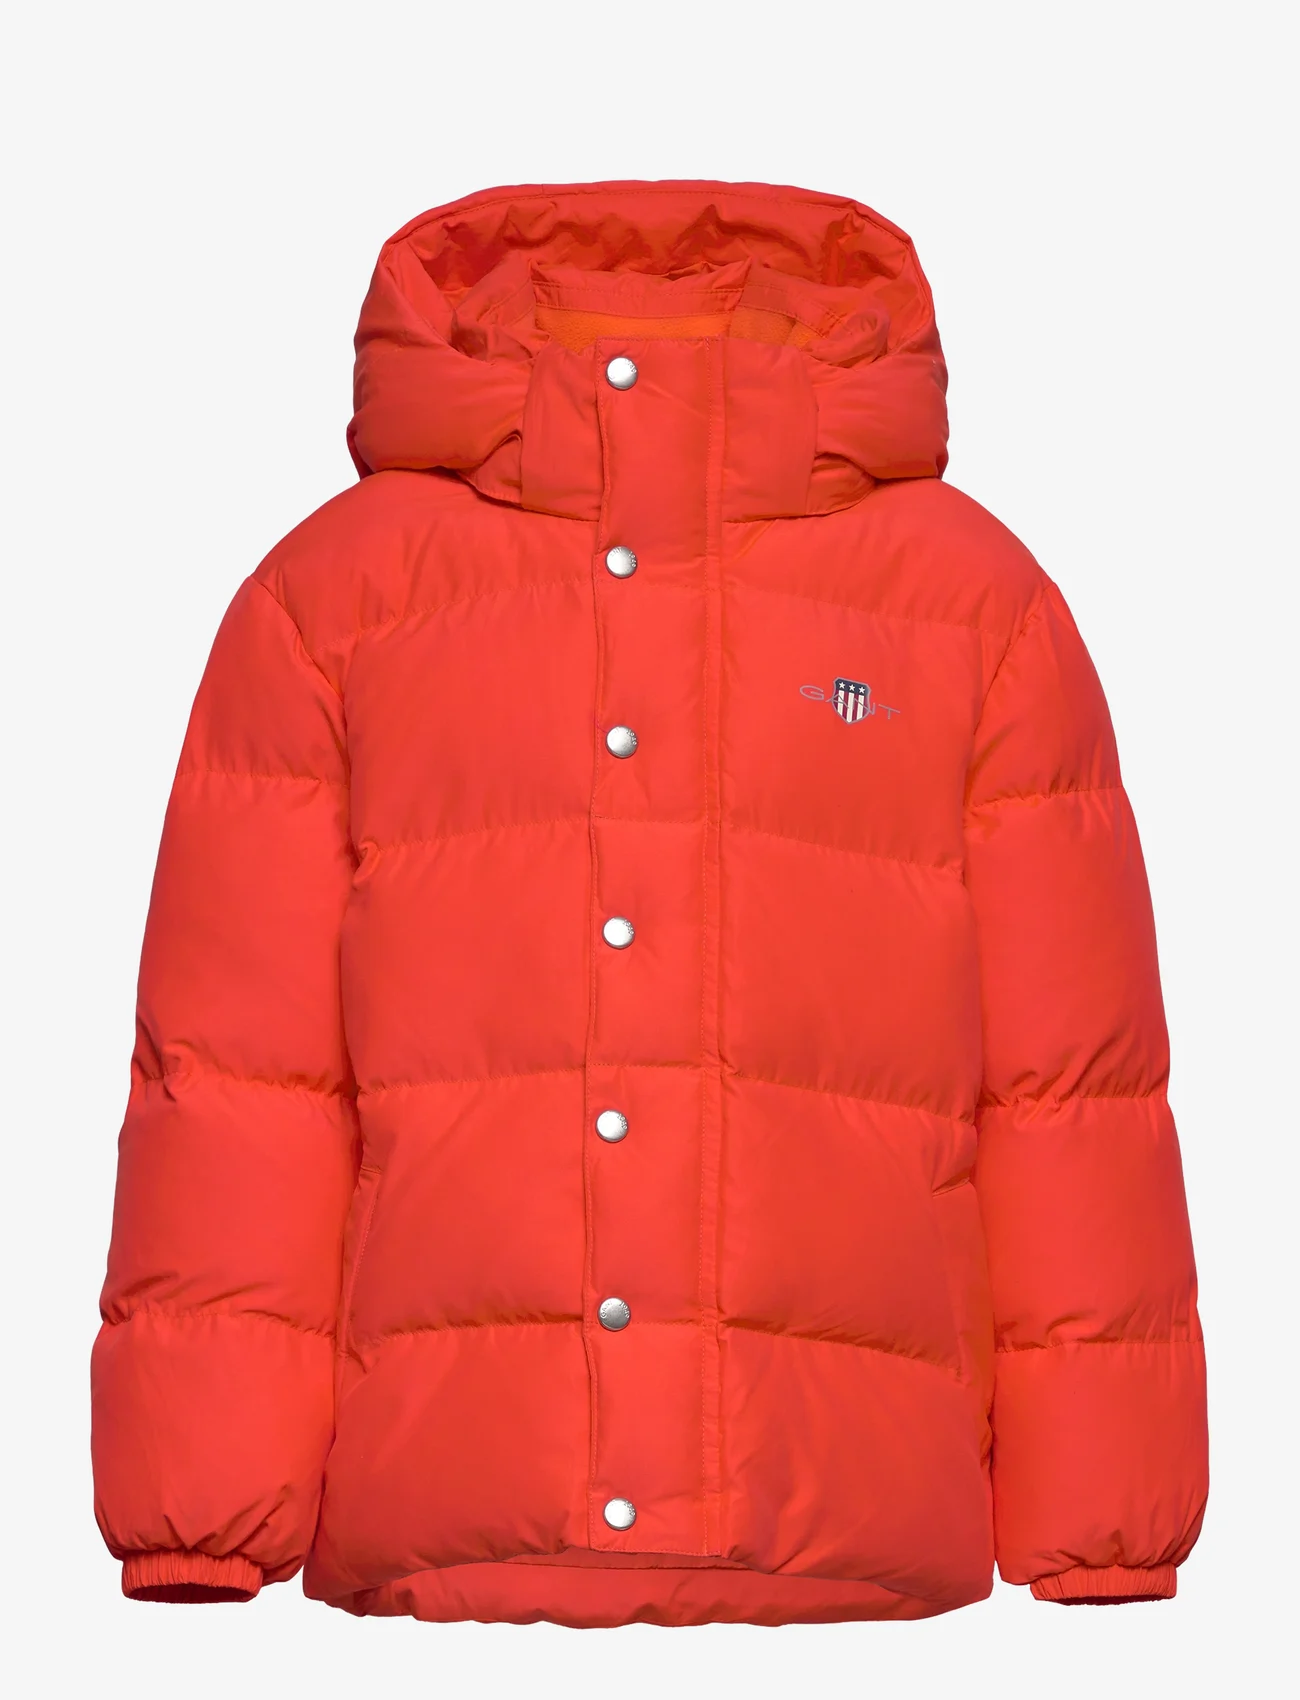 GANT - RELAXED PUFFER JACKET - puffer & padded - tomato red - 0